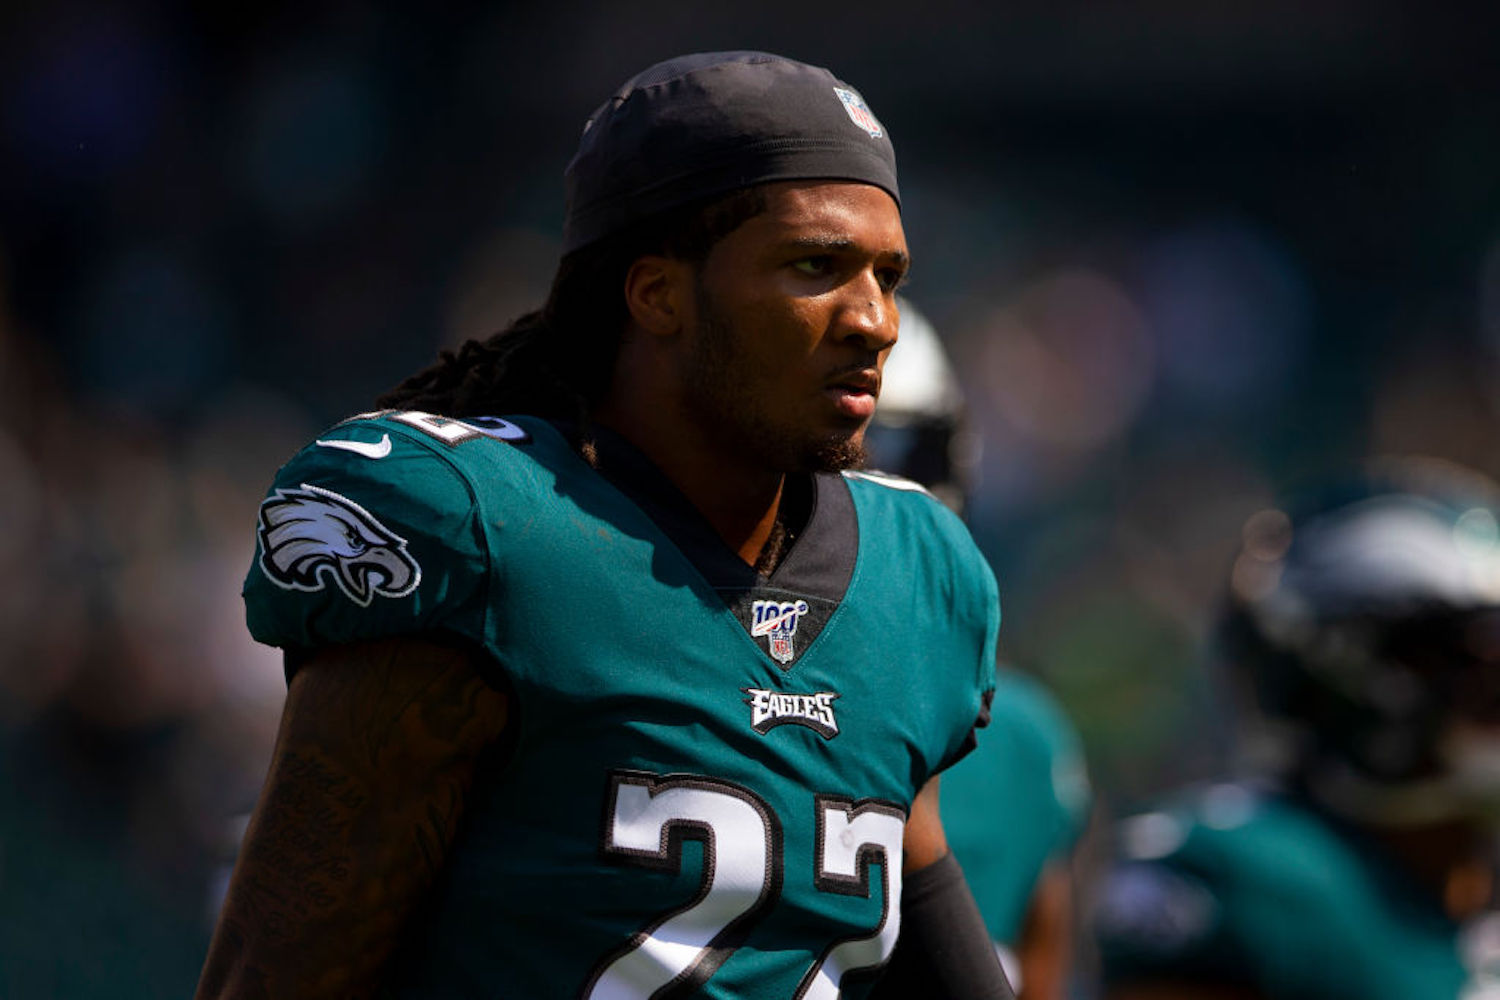 Sidney Jones was supposed to be the answer to the Eagles' longtime cornerback woes, but he didn't even last four seasons in Philadelphia.